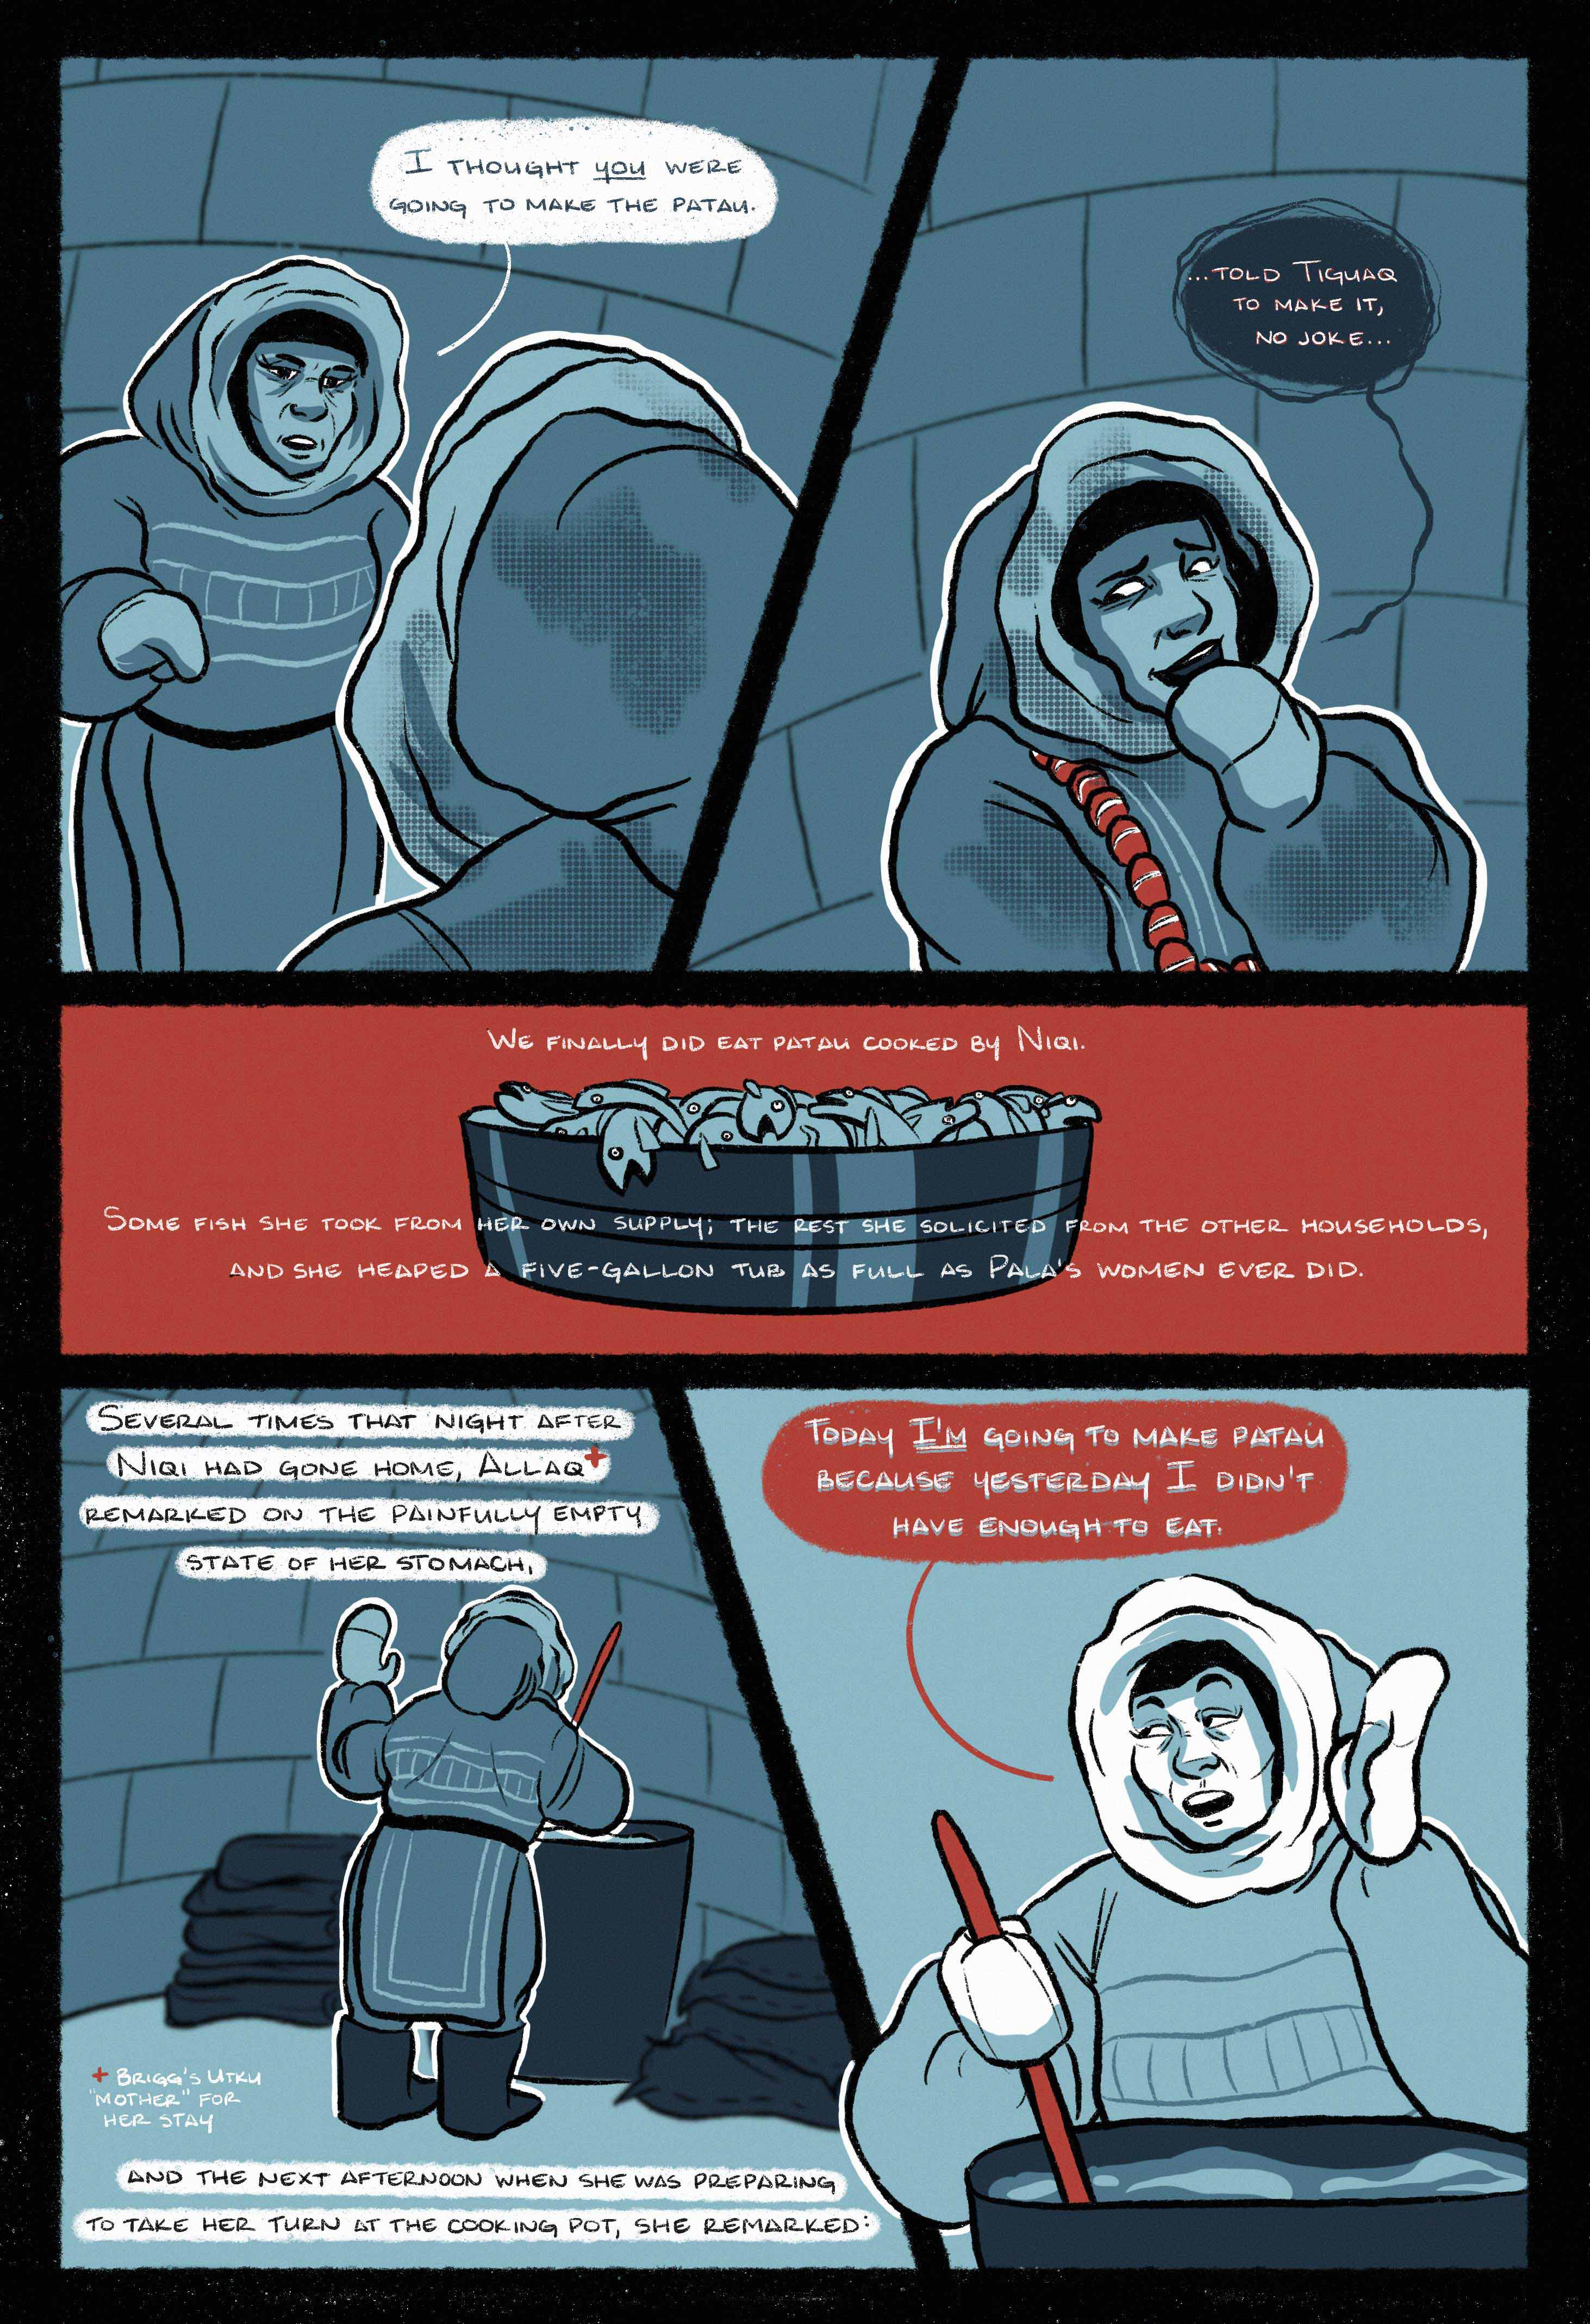 Quip Johnson Graphic Novel Version of an excerpt from Jean Briggs's Never in Anger